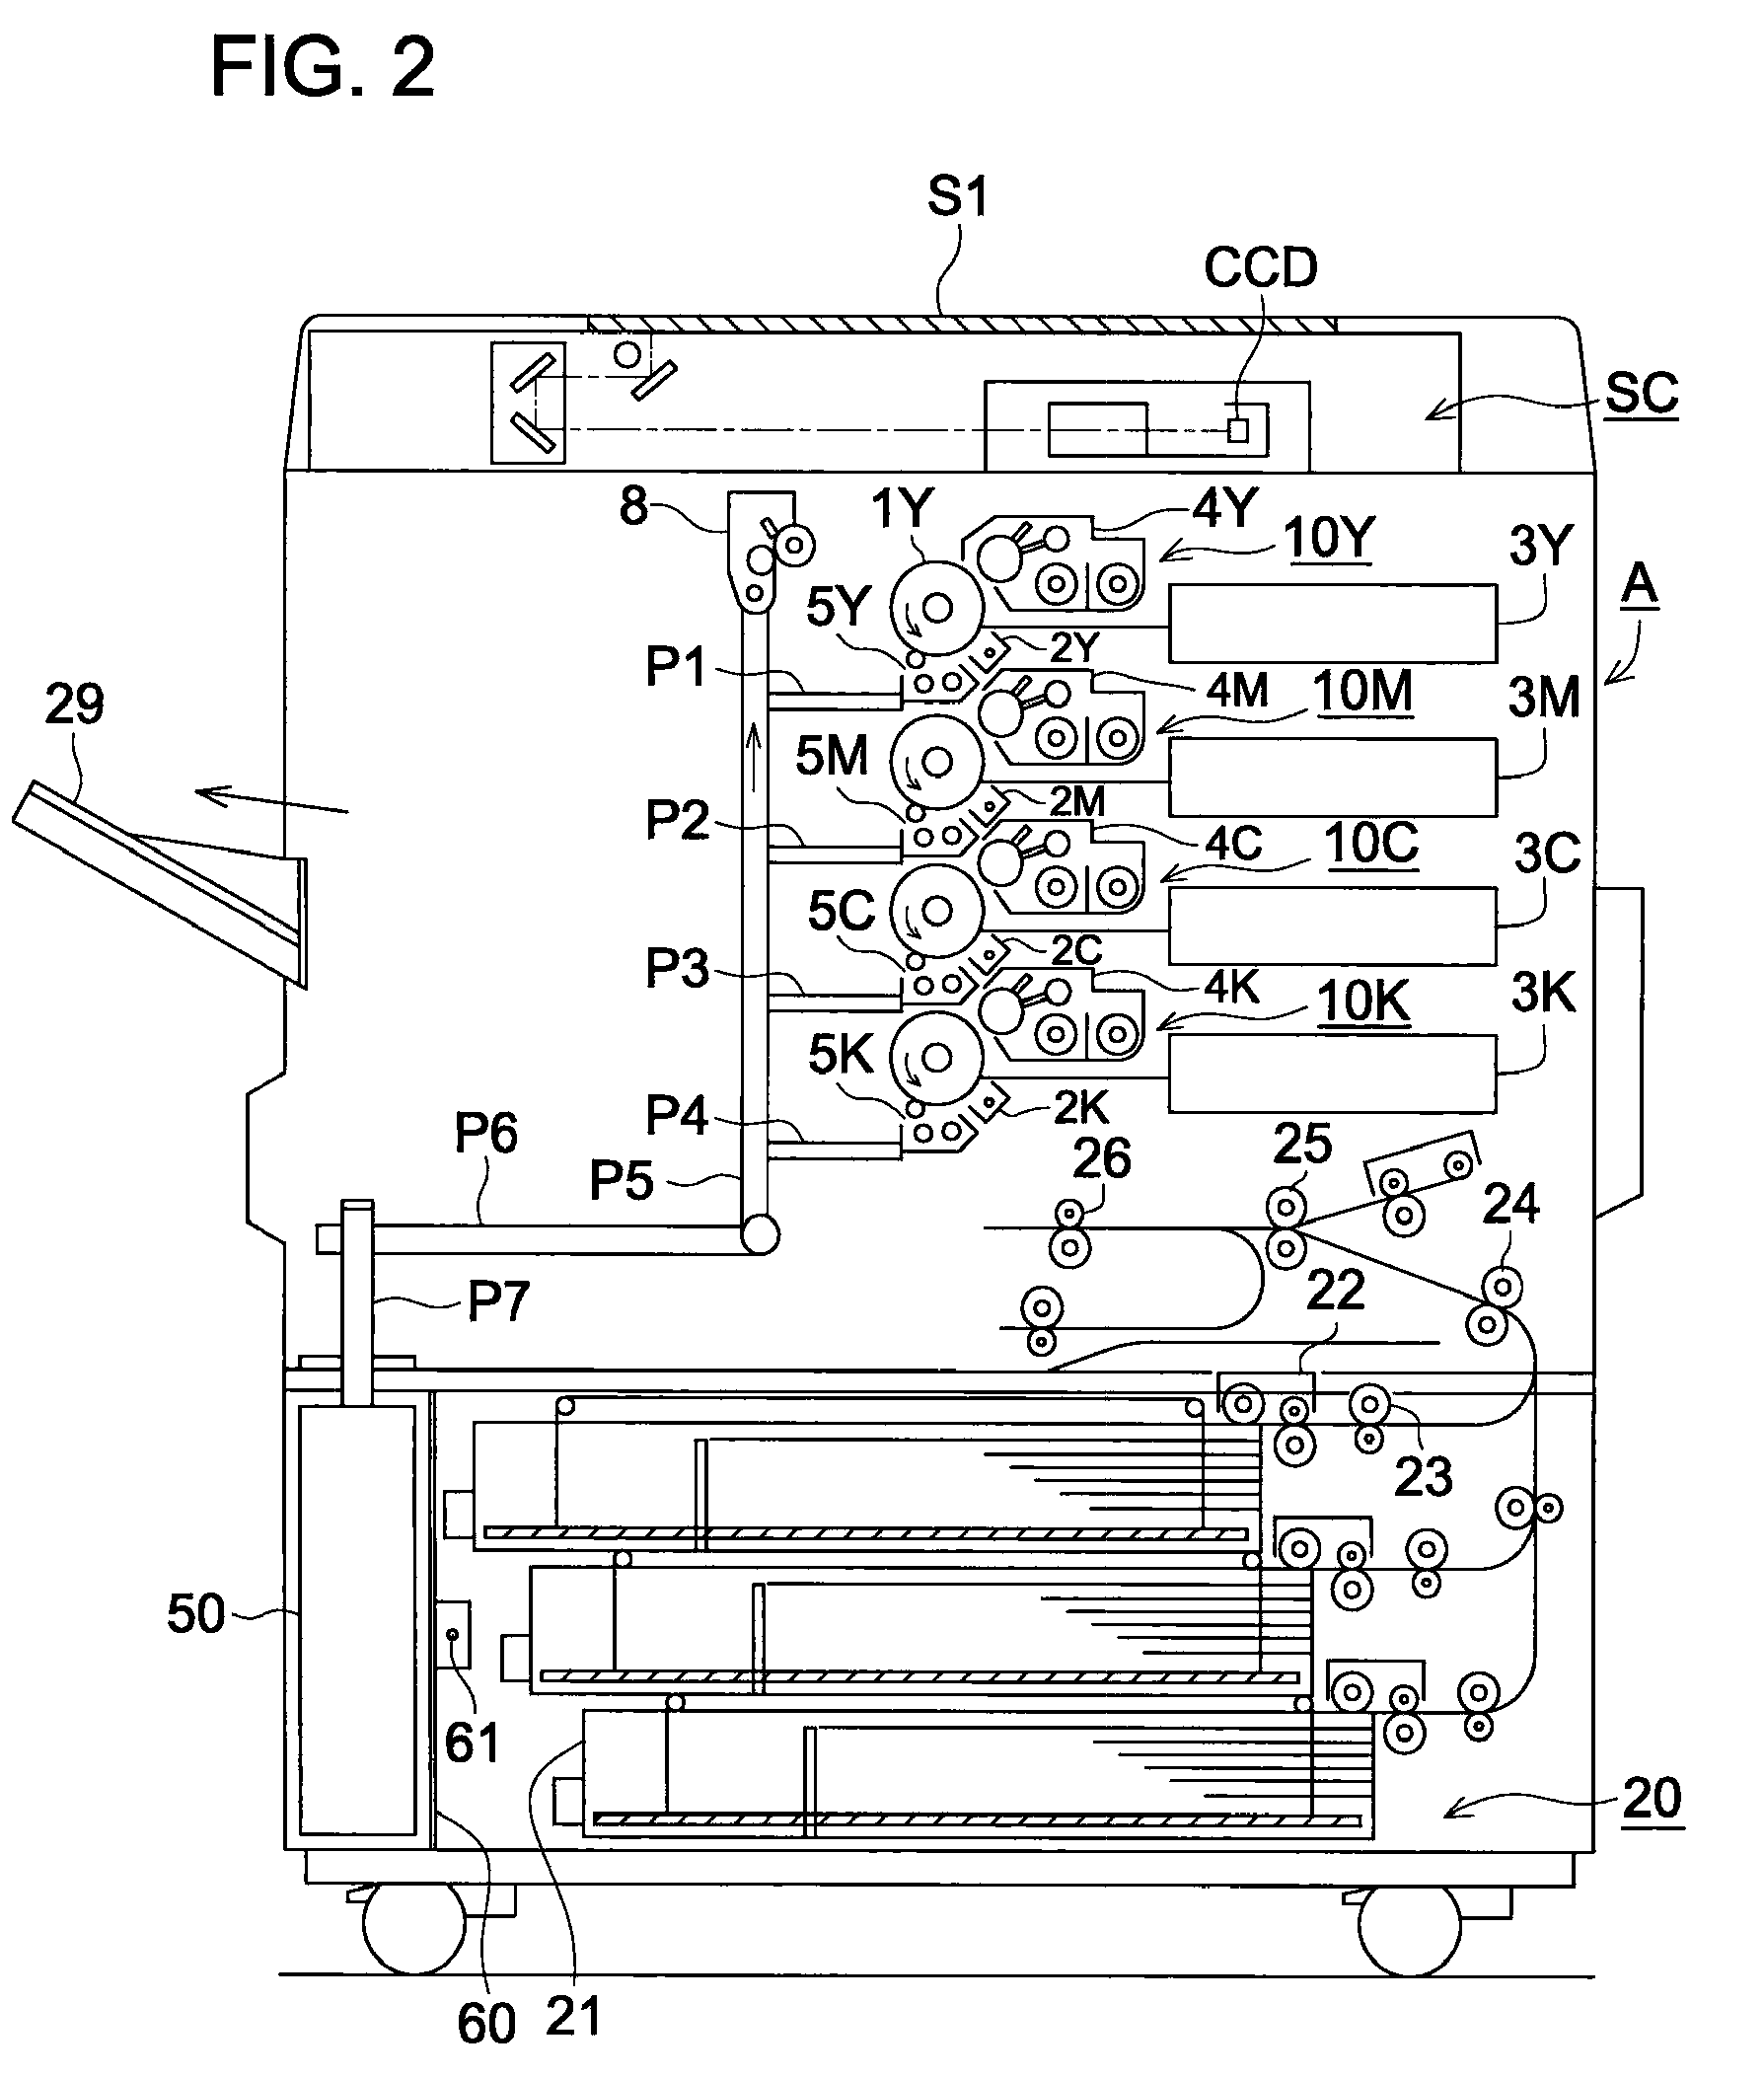 Image forming apparatus with dehumidifying heater